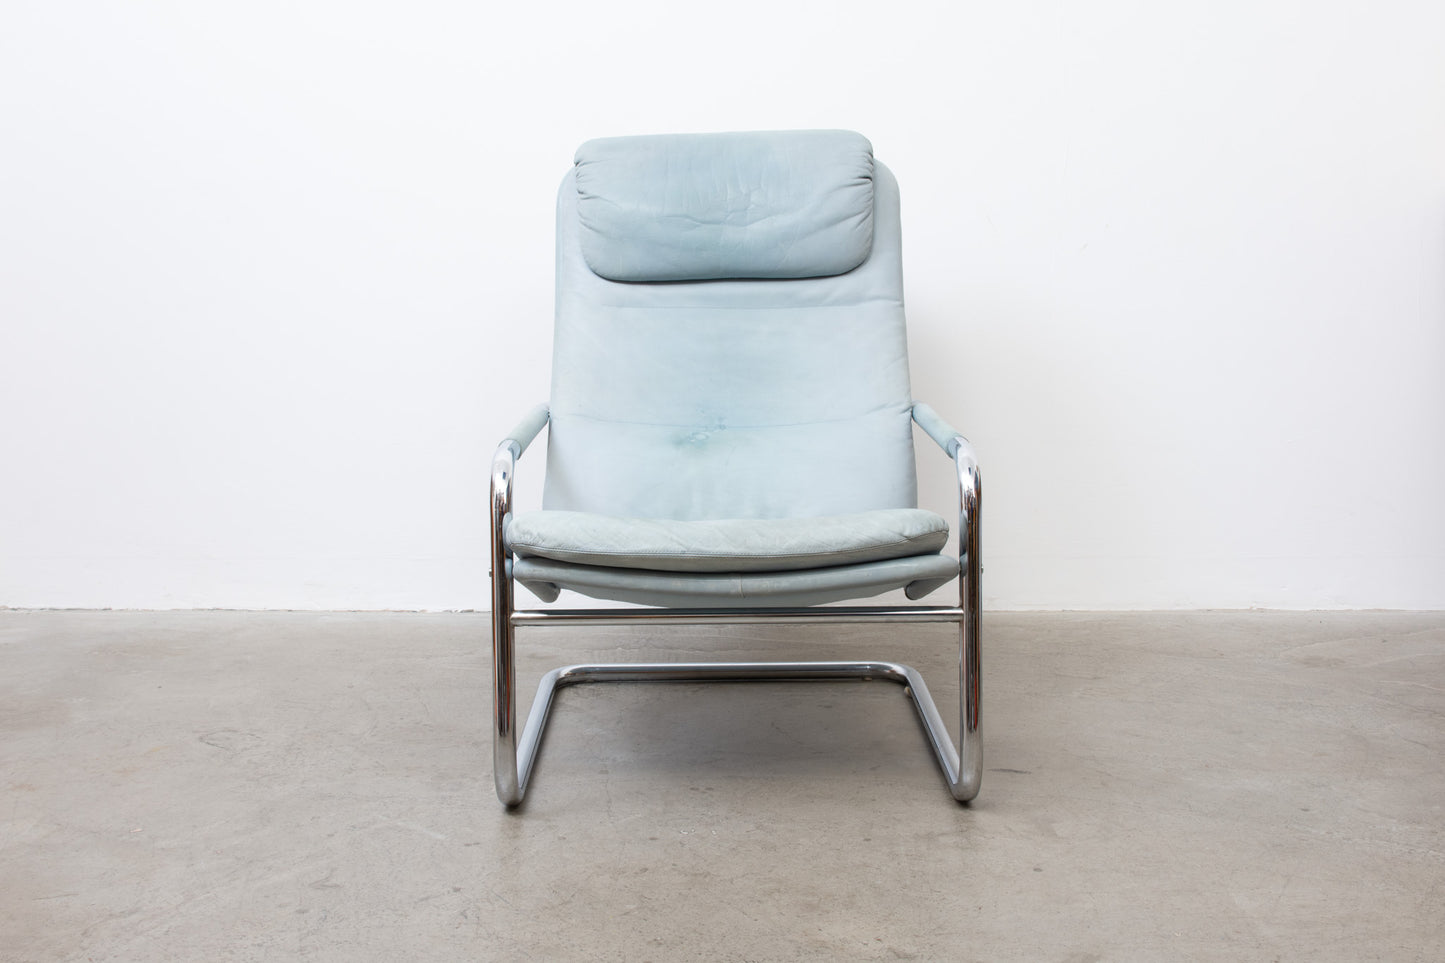 1980s lounger by Kenneth Bergenblad